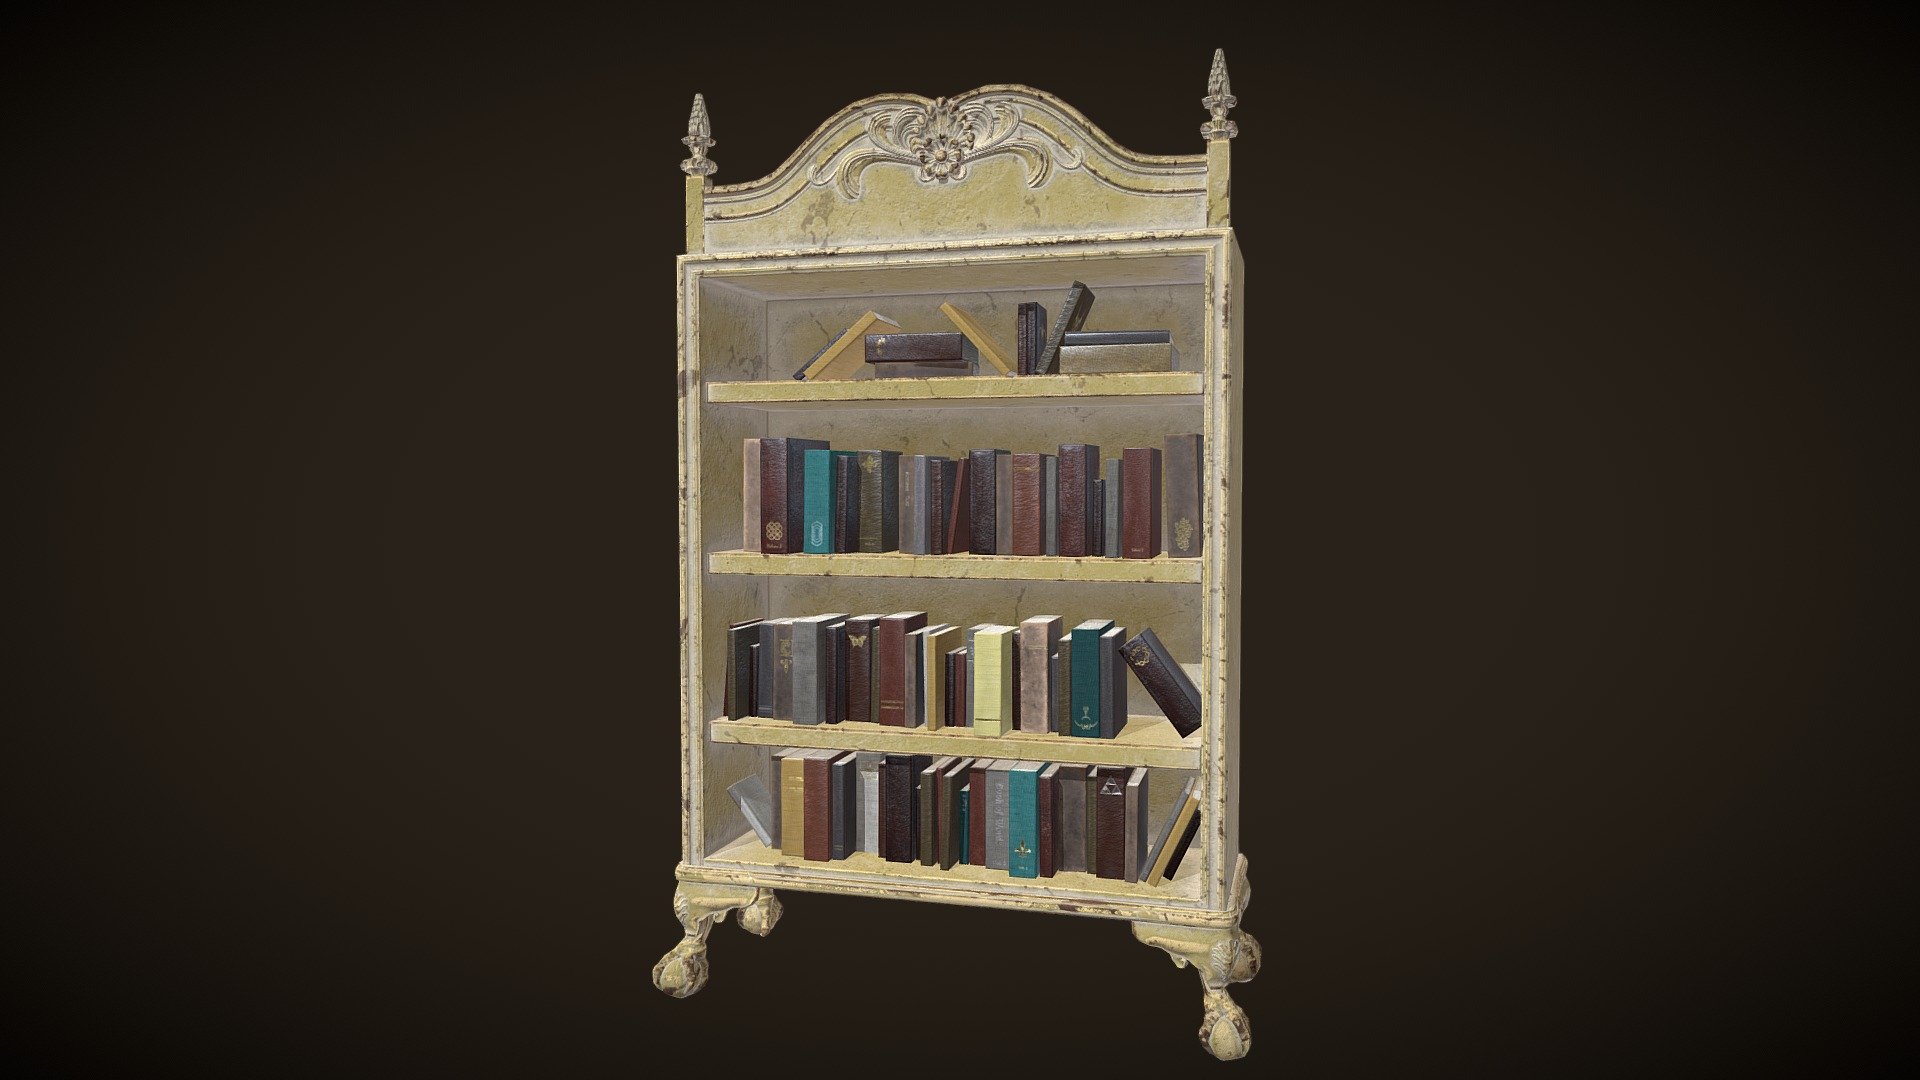 Weathered medium poly book case with books.  Game asset with PBR textures.  High and low poly modeled in Blender, textured in Substance Painter 3d model